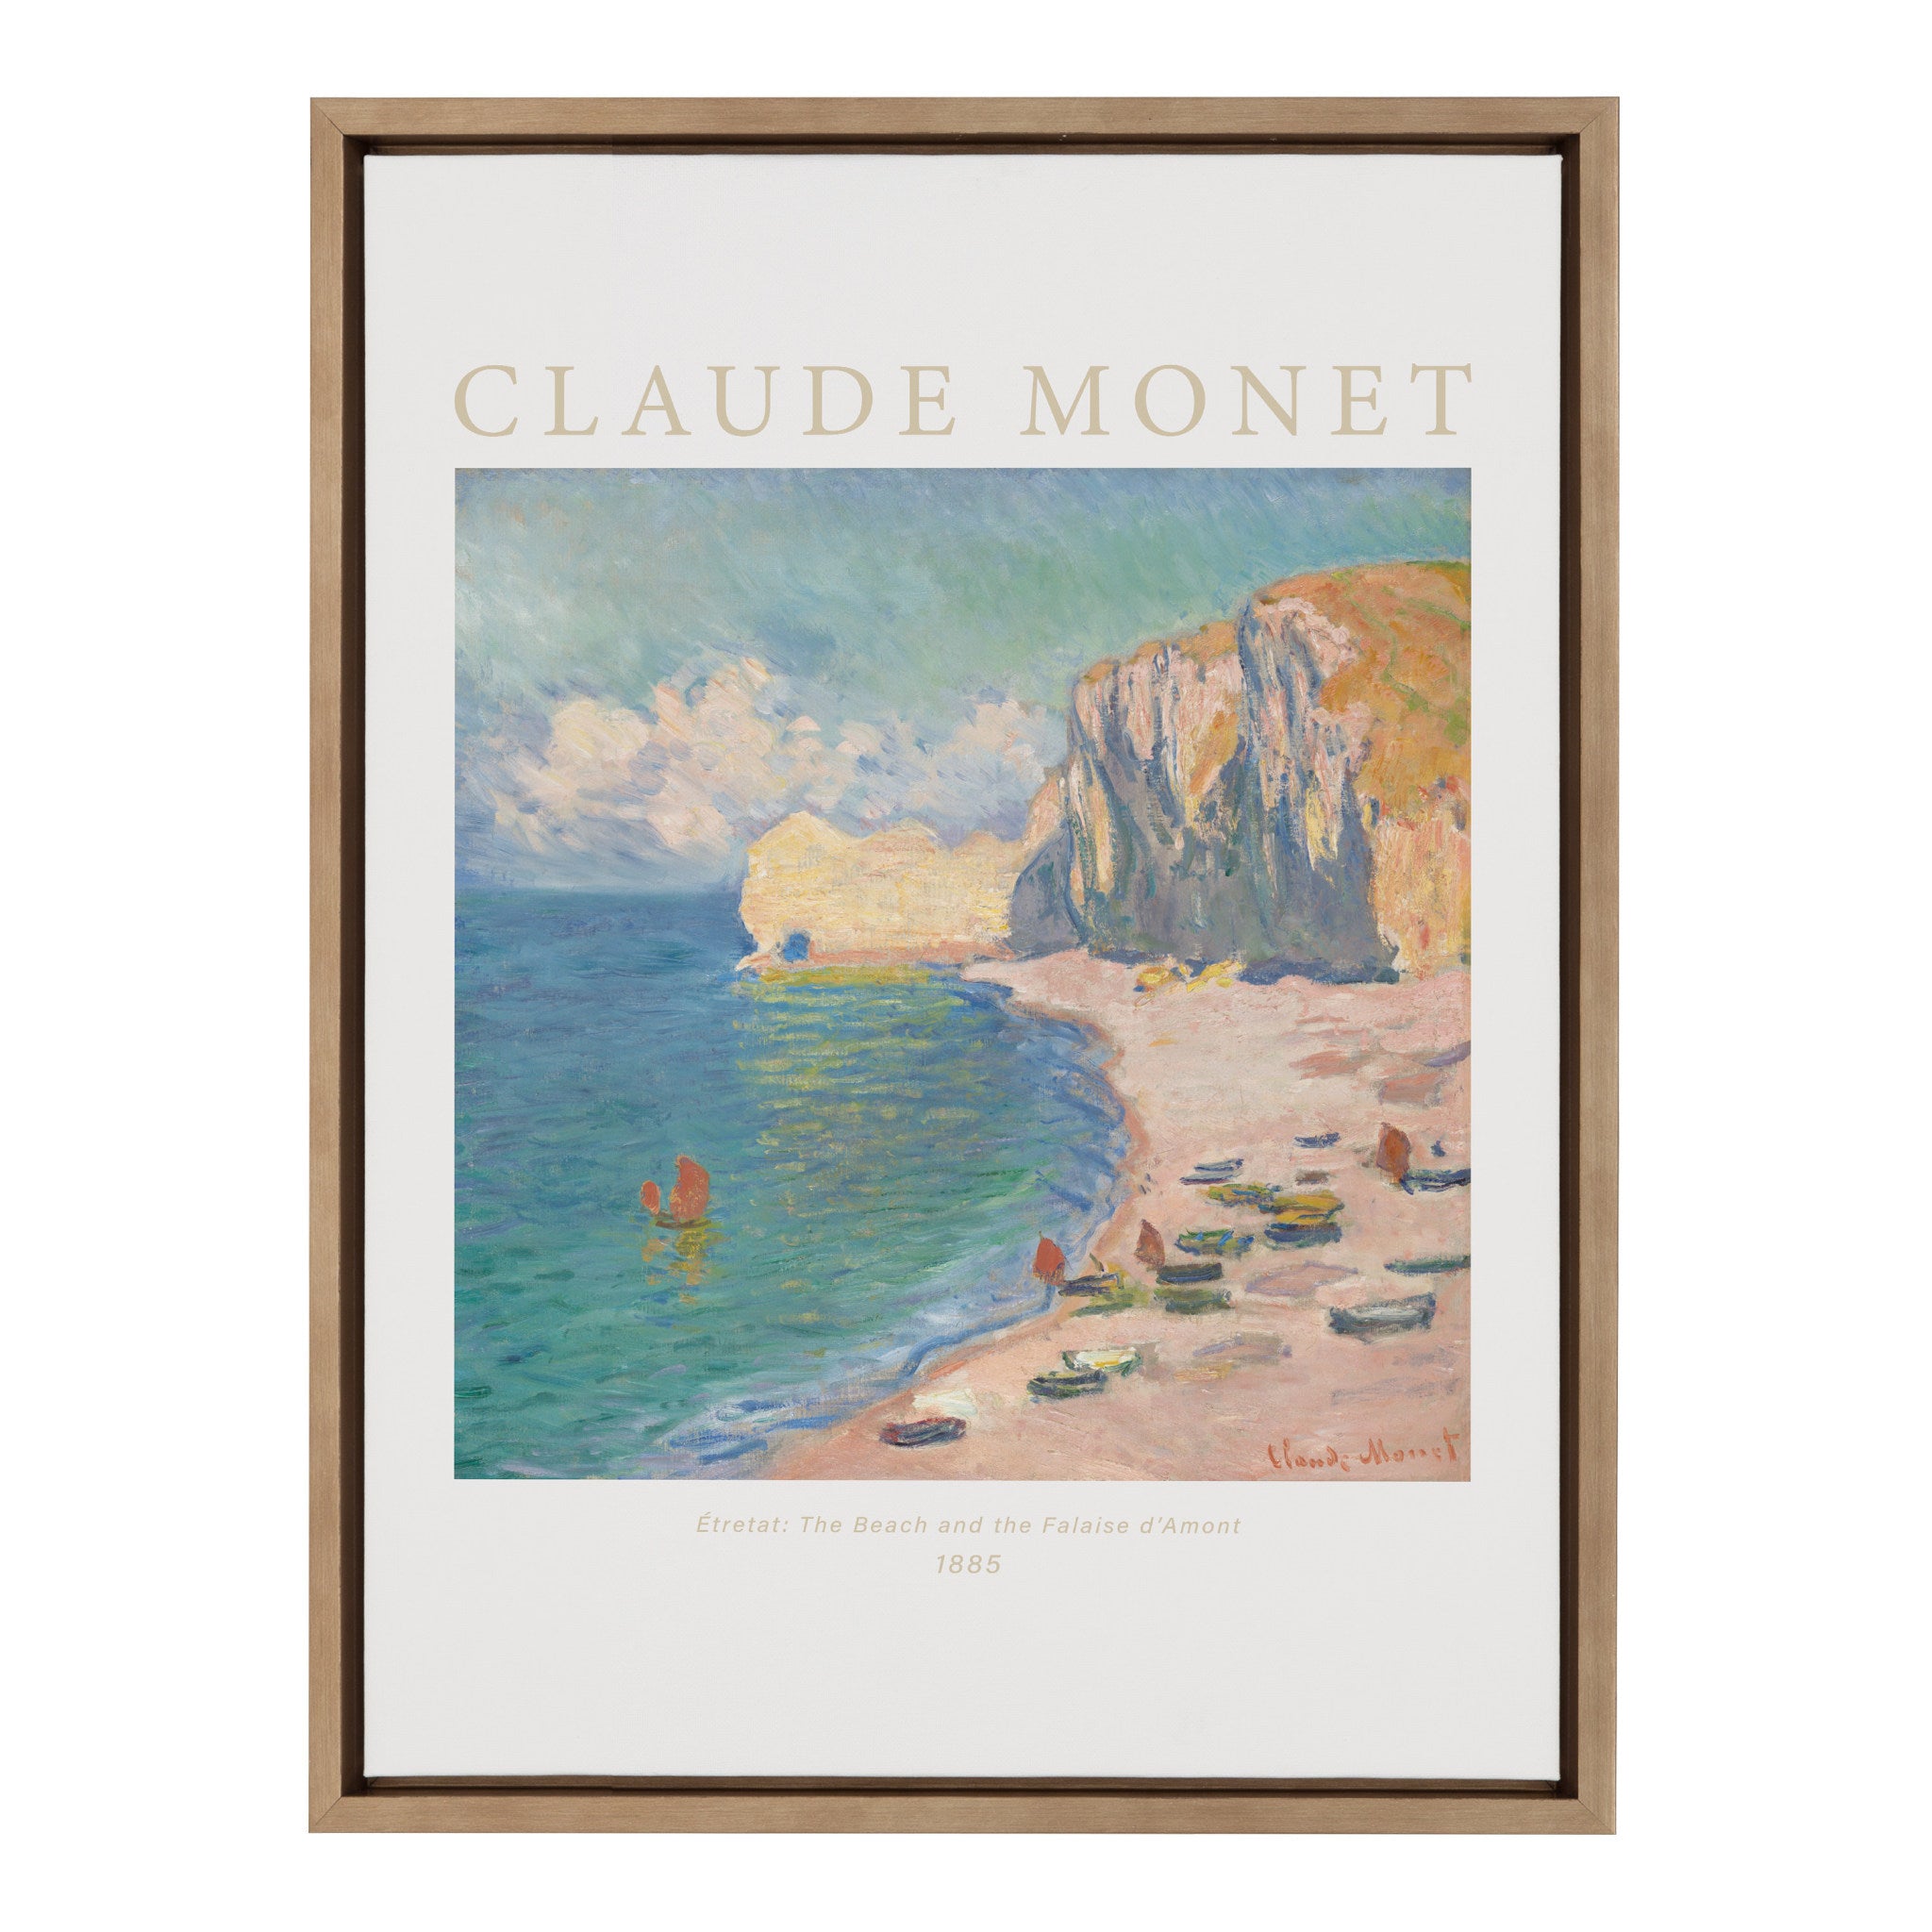 Sylvie Poster Claude Monet Étretat The Beach and the Falaise d’Amont 1885 Framed Canvas by The Art Institute of Chicago